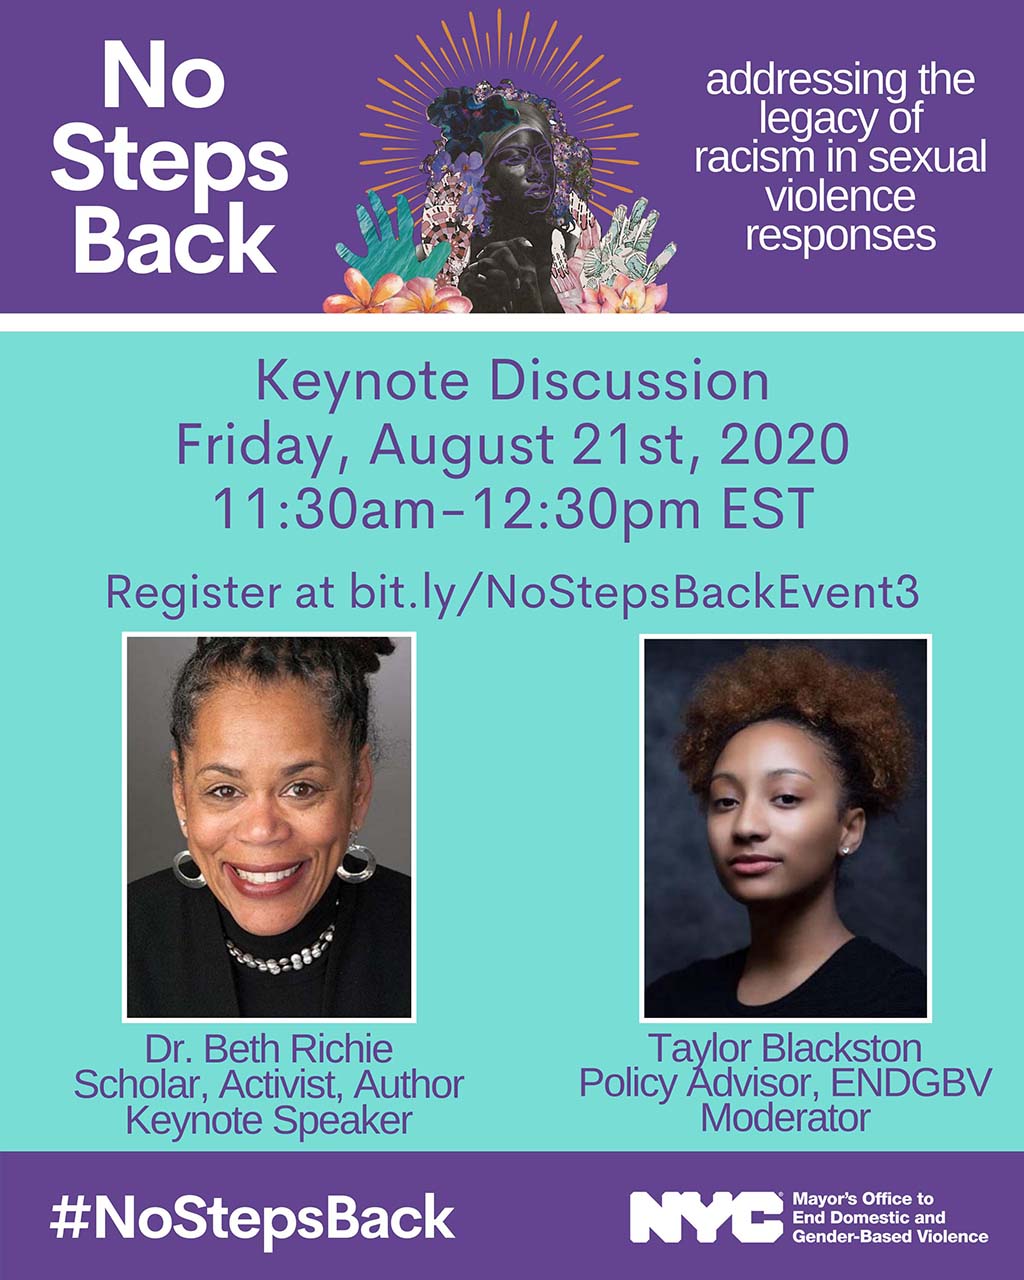 Colorblocked purple and cyan No Steps Back event on August 21st 11:30 a.m. to 12:30 p.m. for Keynote Discussion graphic with headshots of Dr. Beth Richie (scholar, activist, author) and Taylor Blackston (moderator) and ENDBGV logo